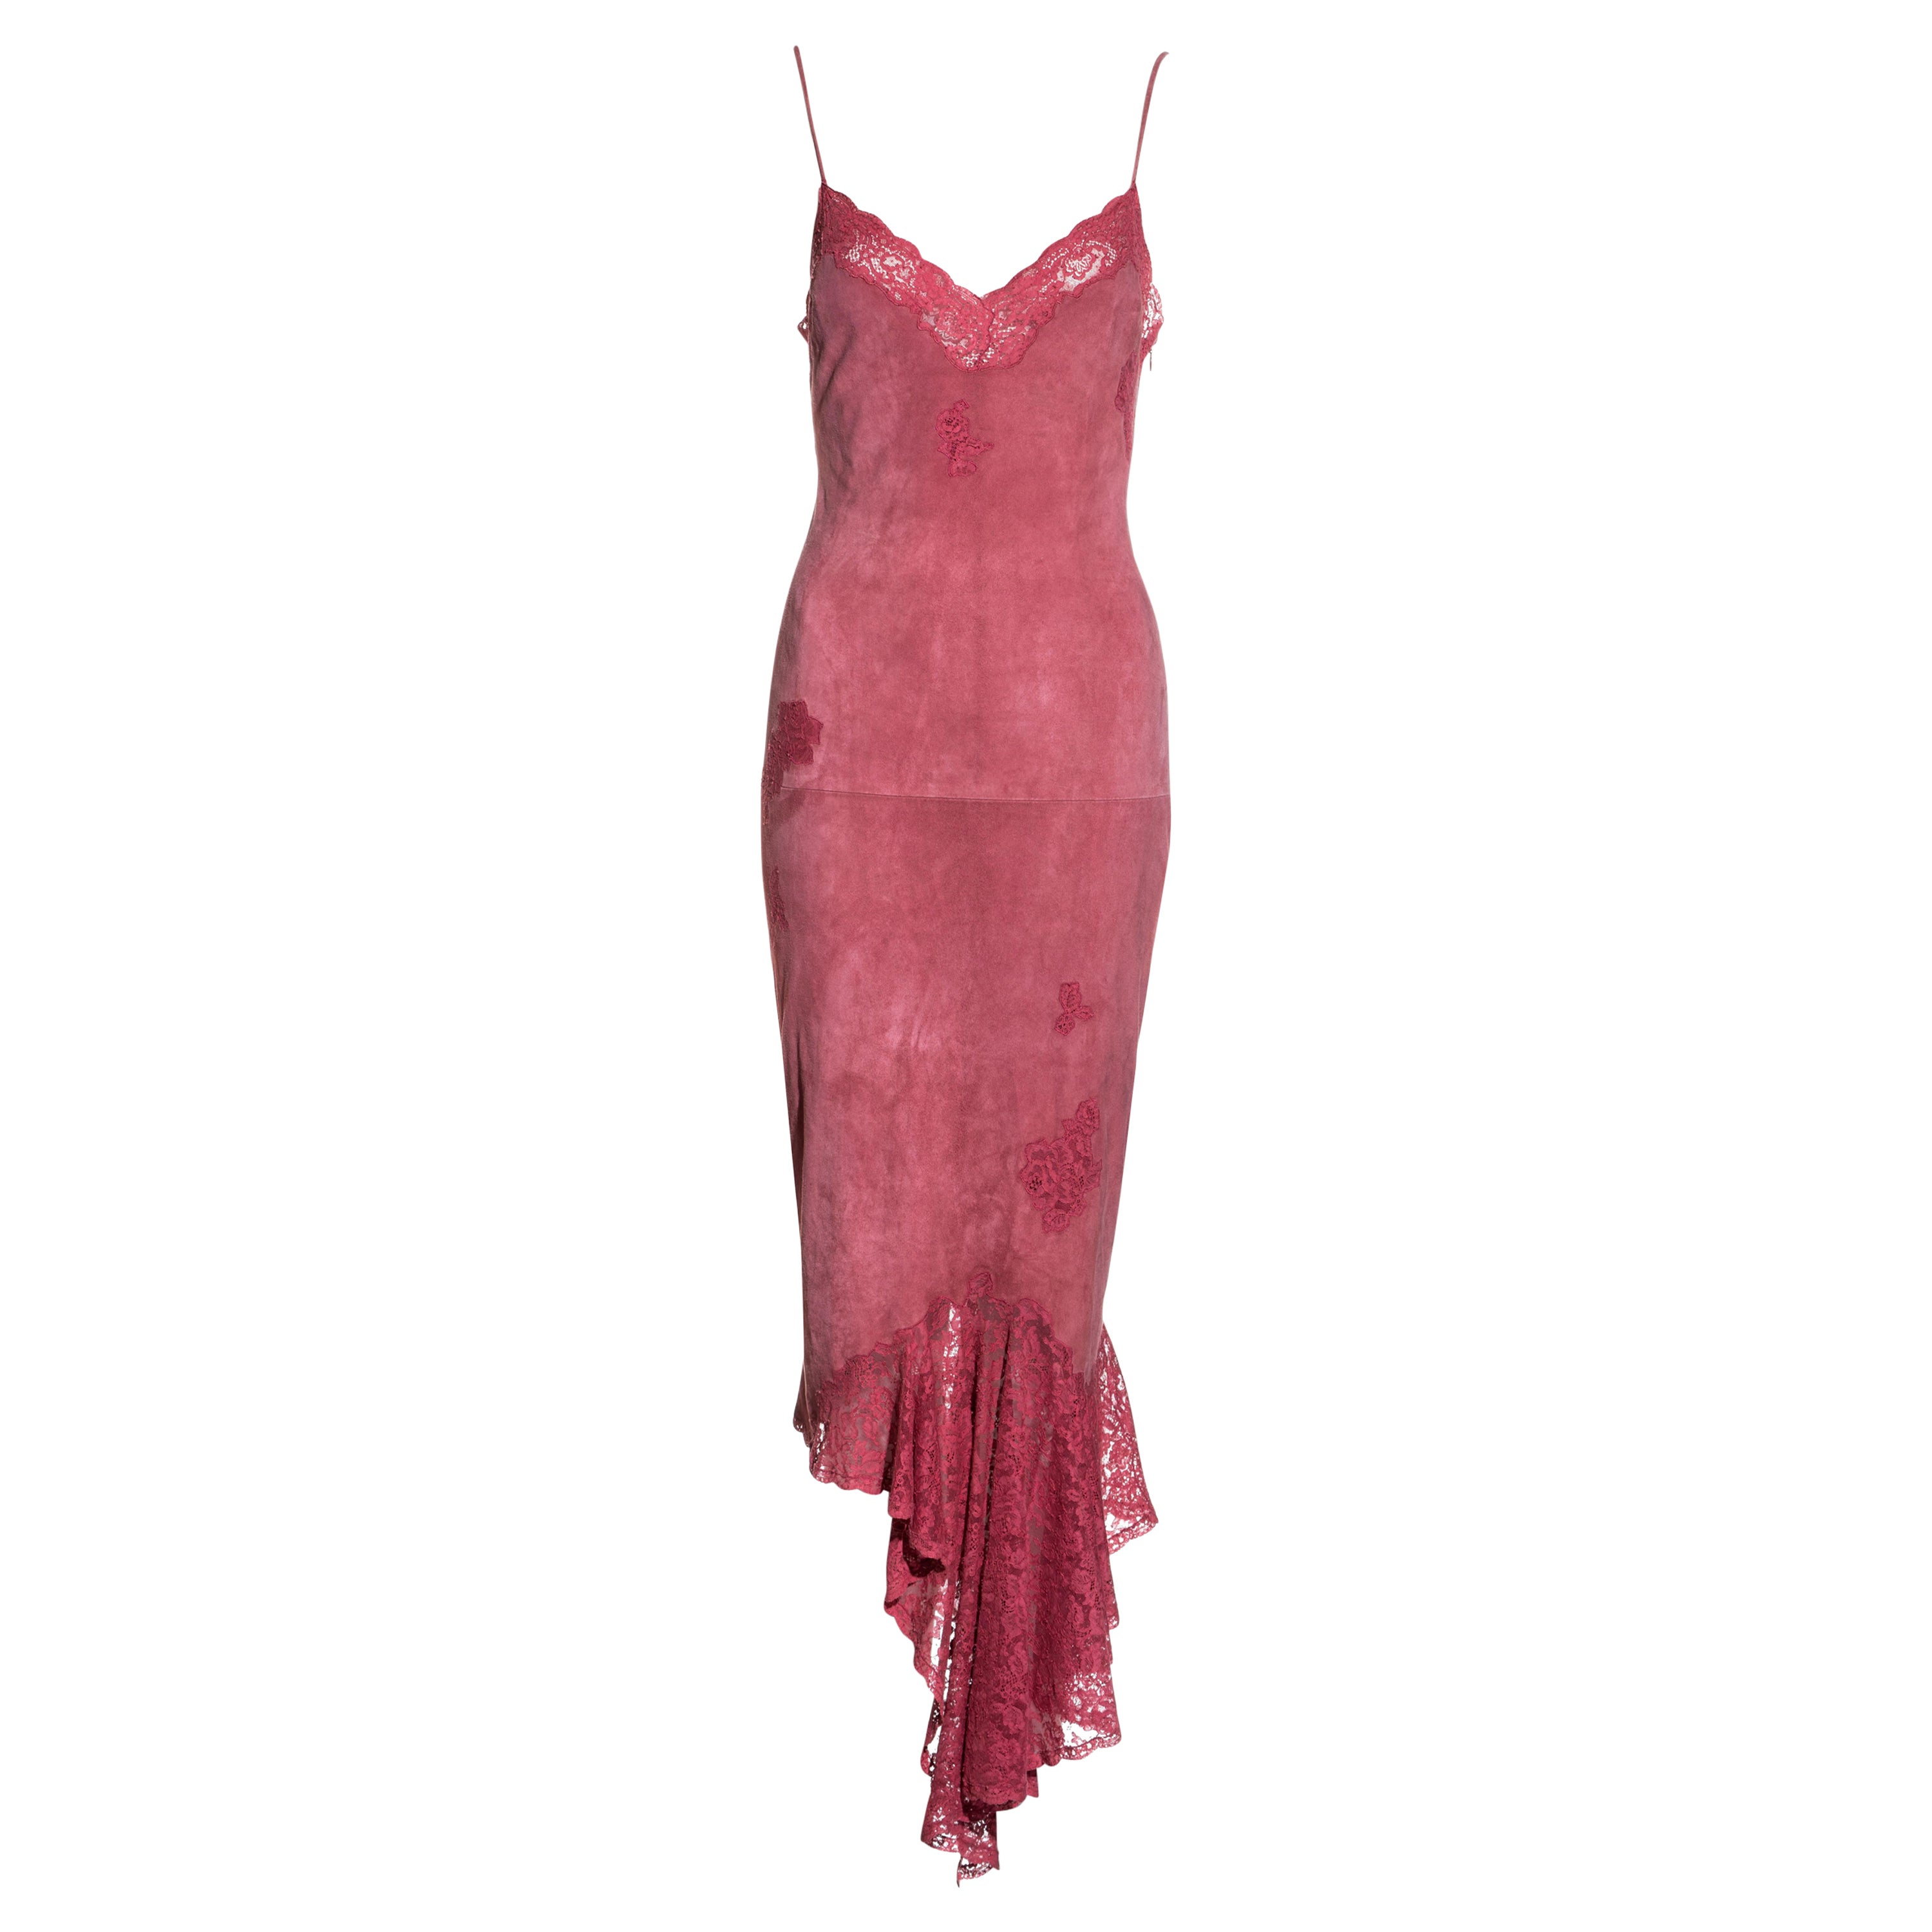 Christian Dior by John Galliano pink suede and lace slip dress, fw 2000